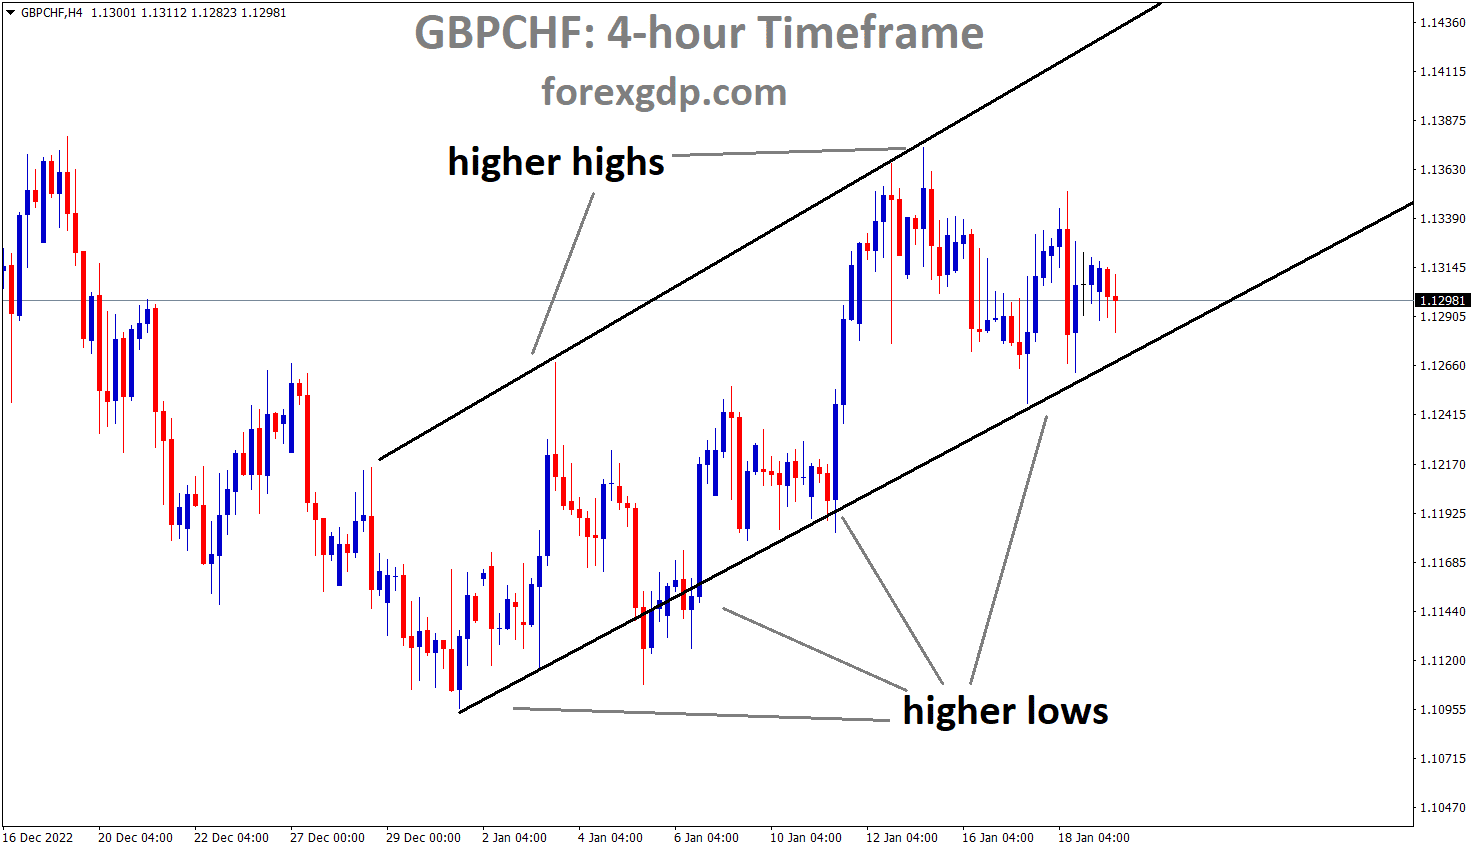 GBPCHF is moving in an Ascending channel and the market has reached the higher low area of the channel